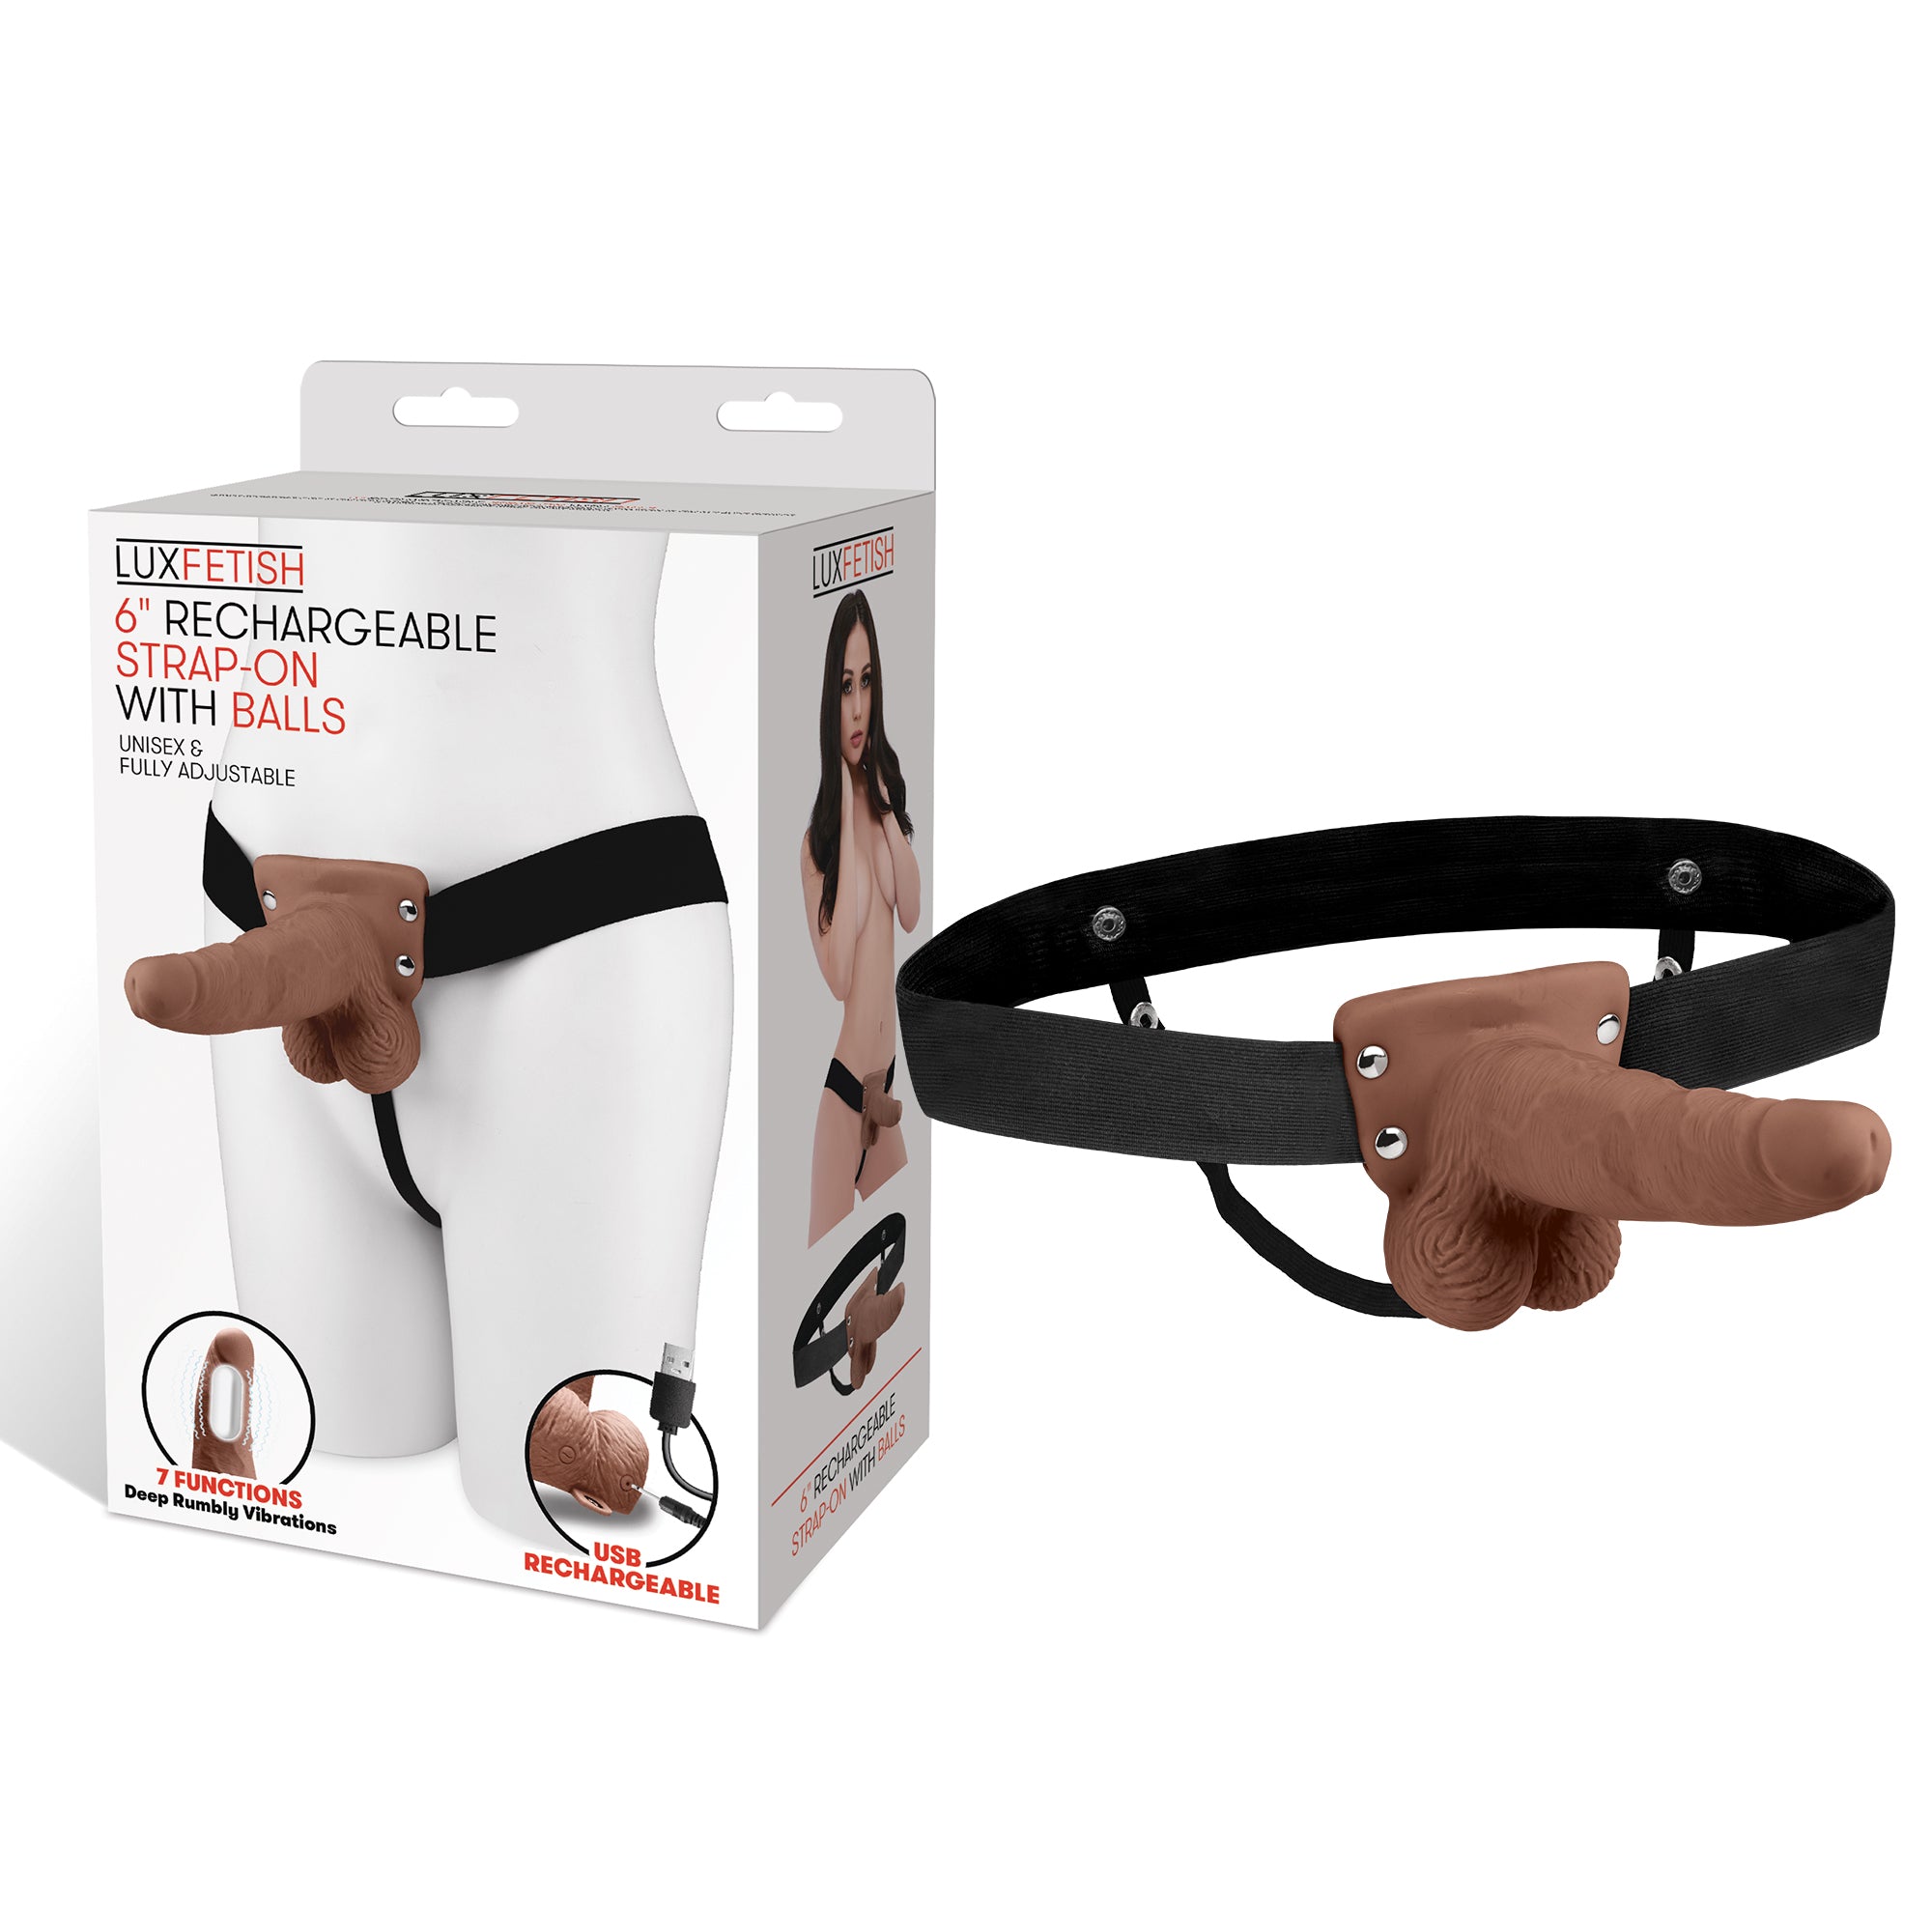 6" Rechargeable Strap-on With Balls - Brown